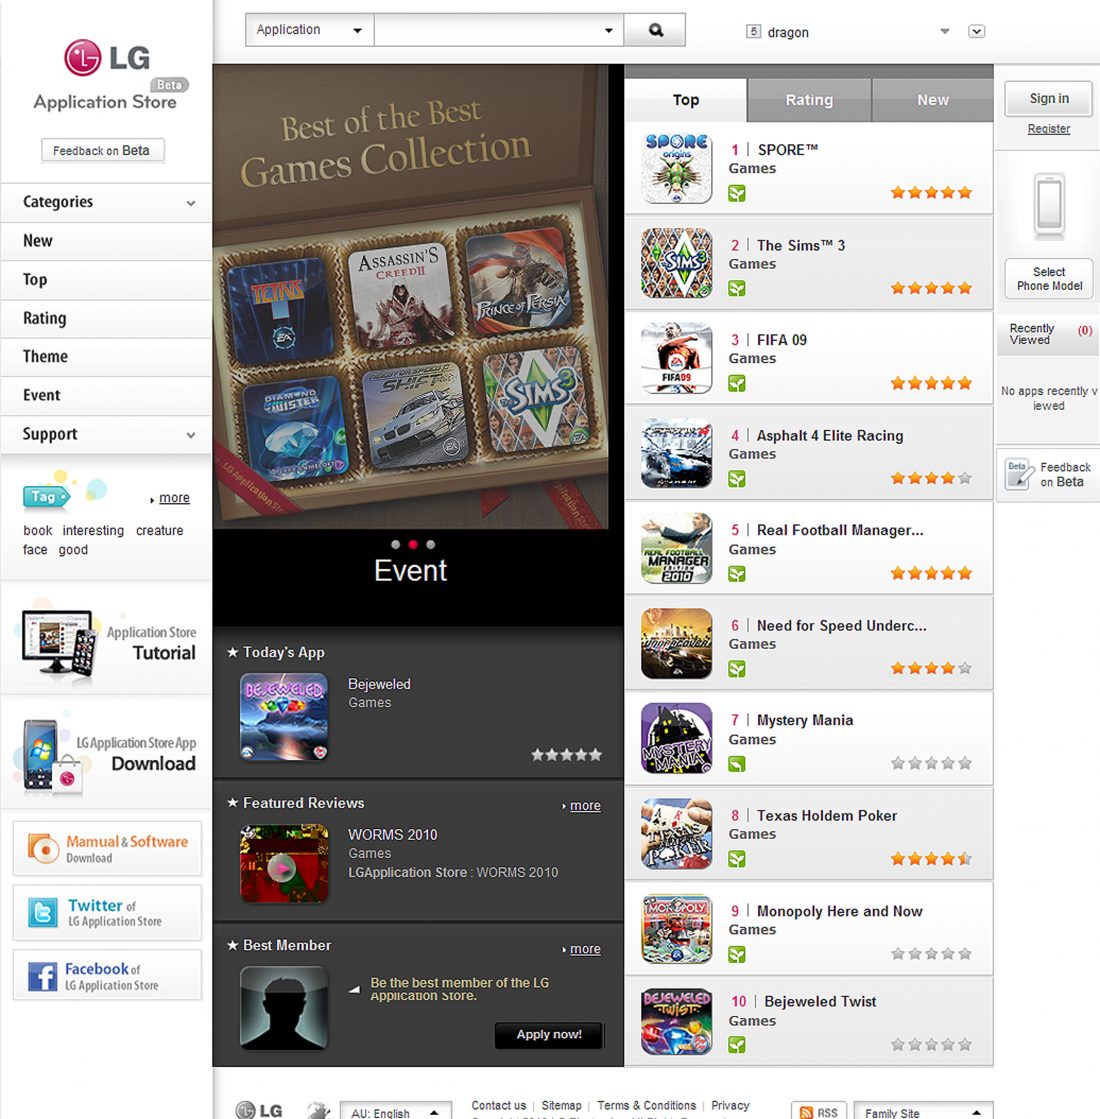 Screenshot of the online LG Application Store